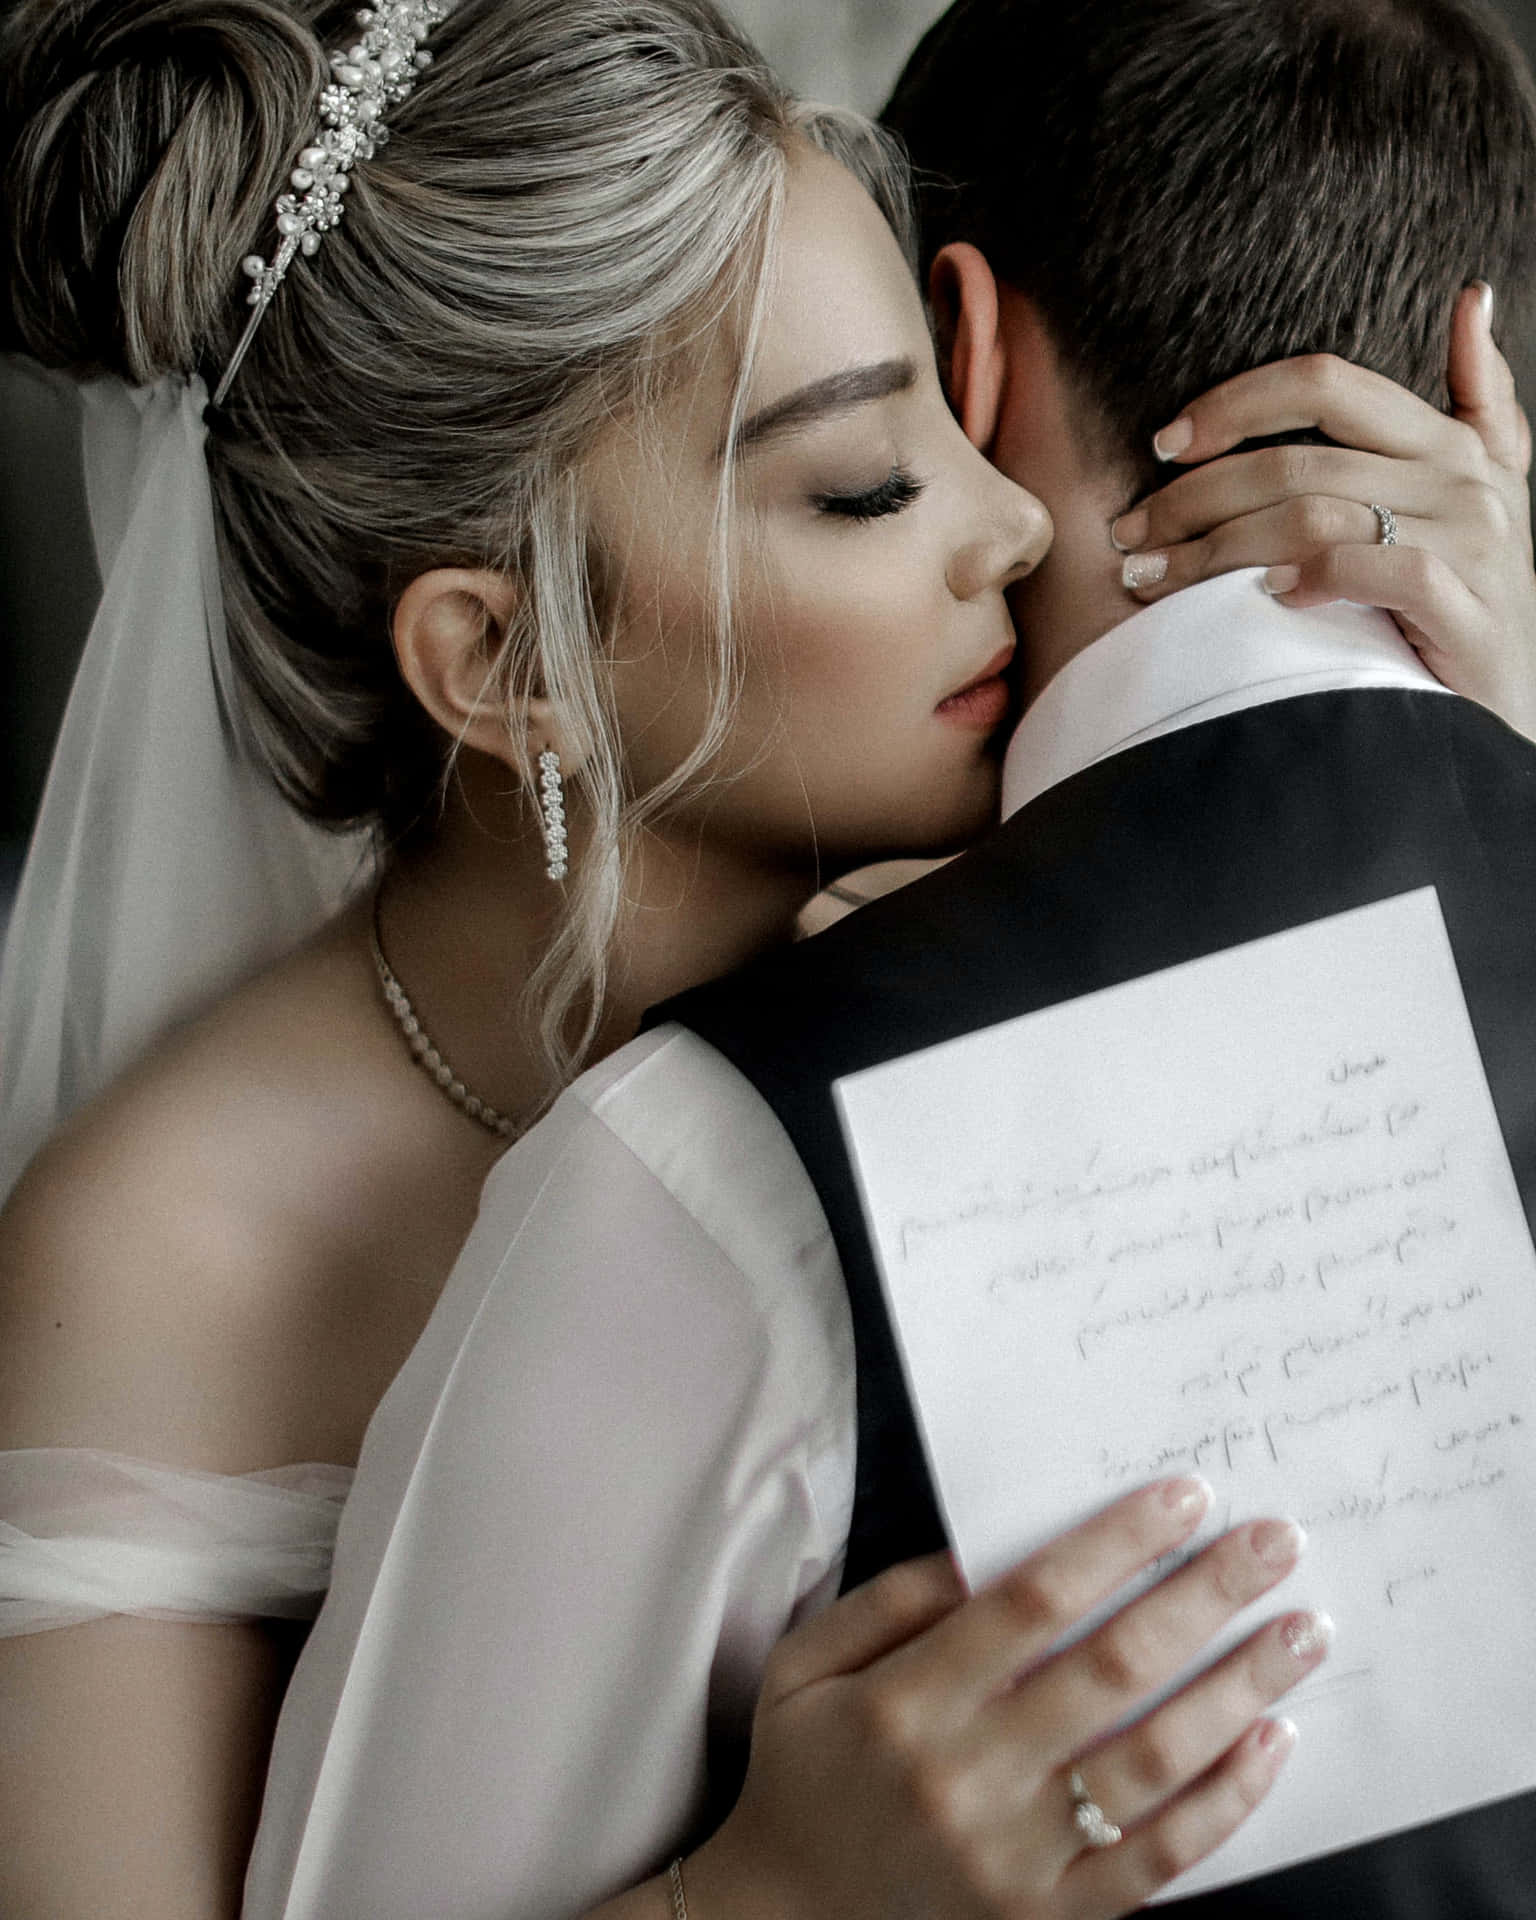 Couple Romance With Love Letter Picture